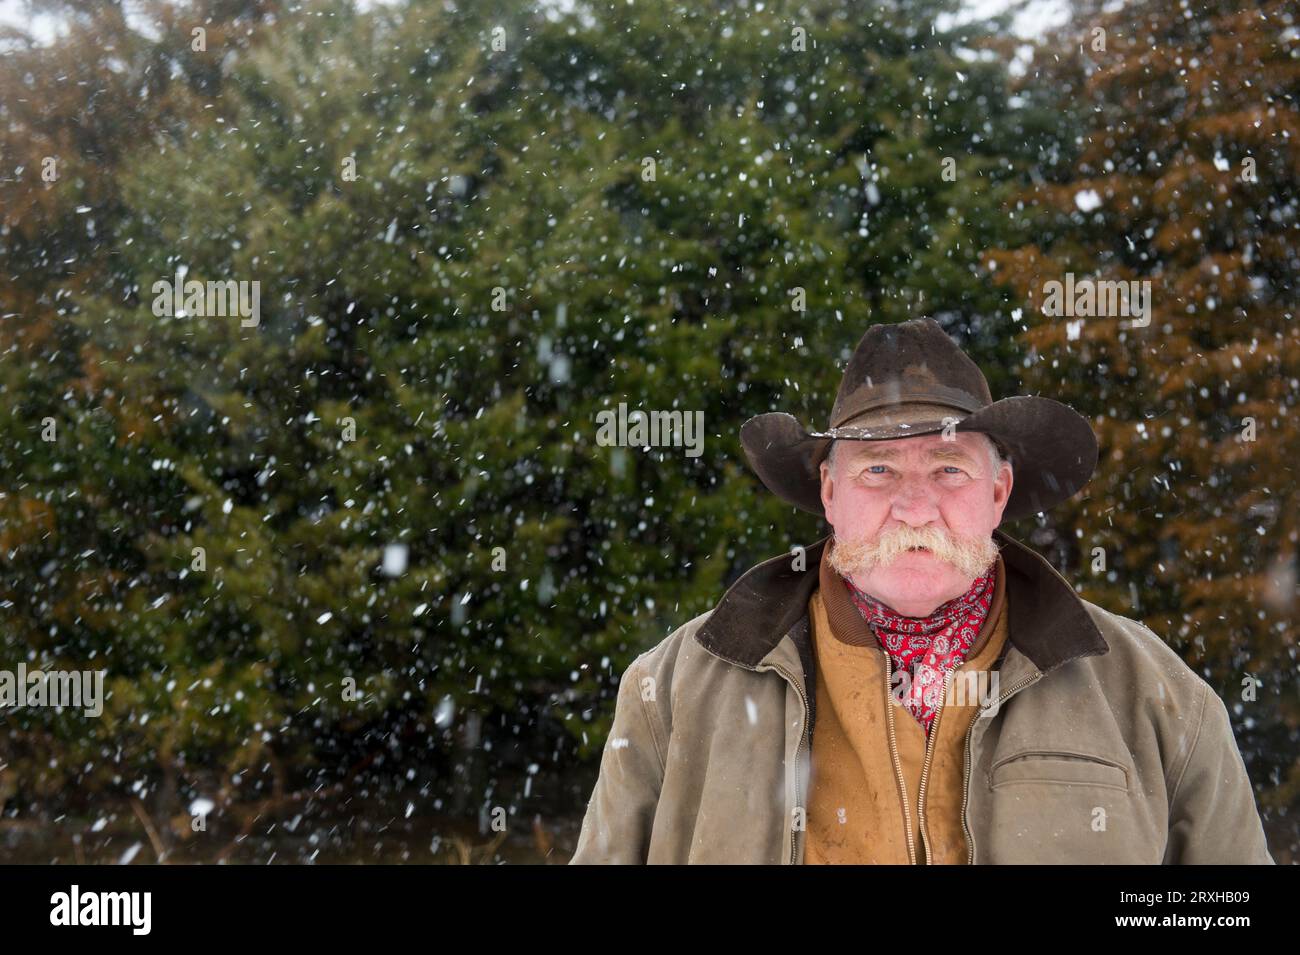 Portrait of a man in a cowboy hat standing in front of evergreen trees during a snowfall; Burwell, Nebraska, United States of America Stock Photo